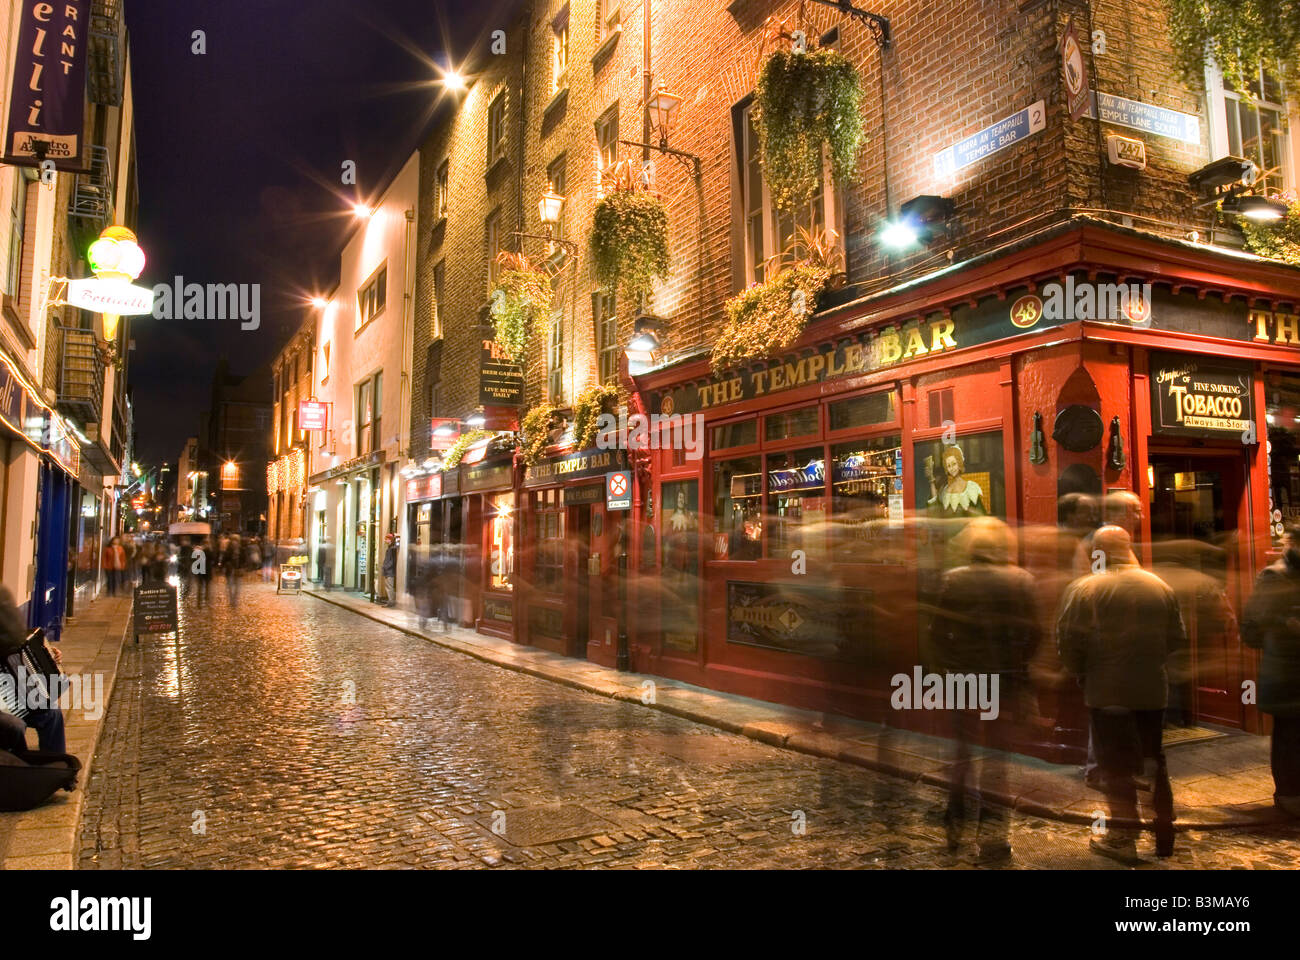 People outside the famous Temple Bar in Temple Bar, Dublin, Ireland at night Stock Photo